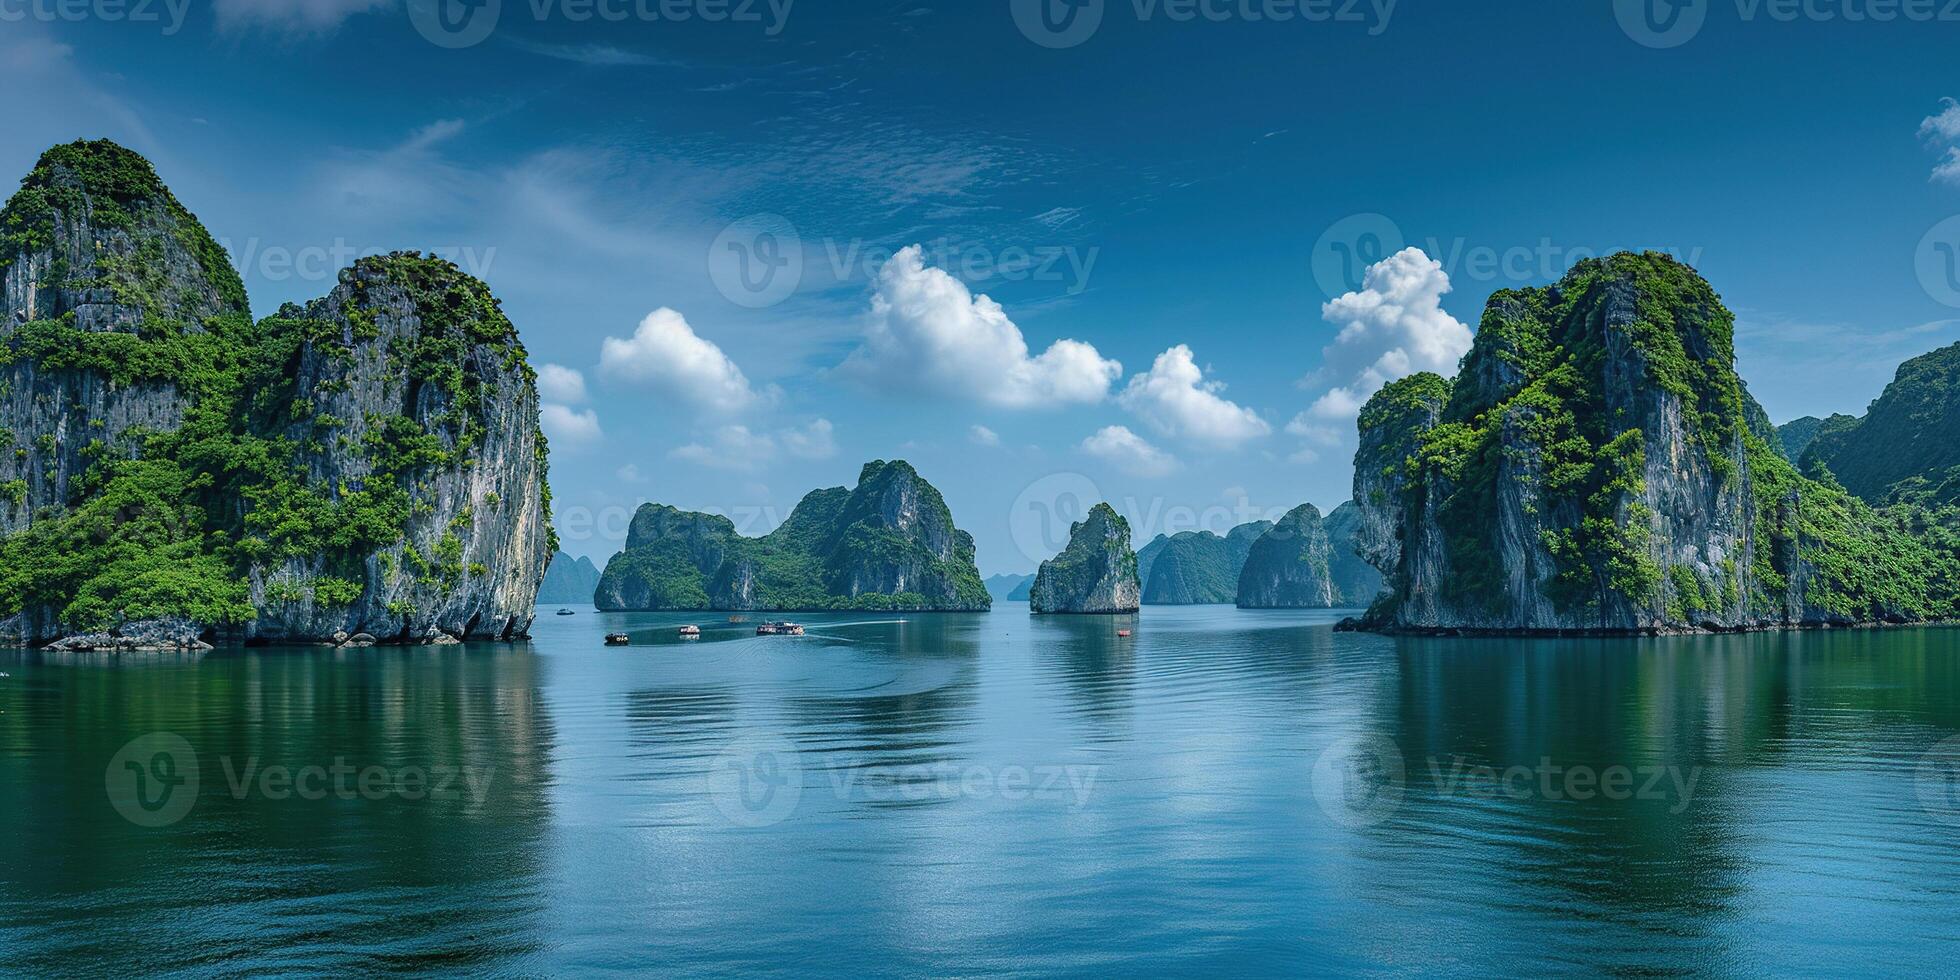 AI generated Ha Long Bay, Halong bay World Heritage Site, limestone islands, emerald waters with boats in province, Vietnam. Travel destination, natural wonder landscape background wallpaper photo